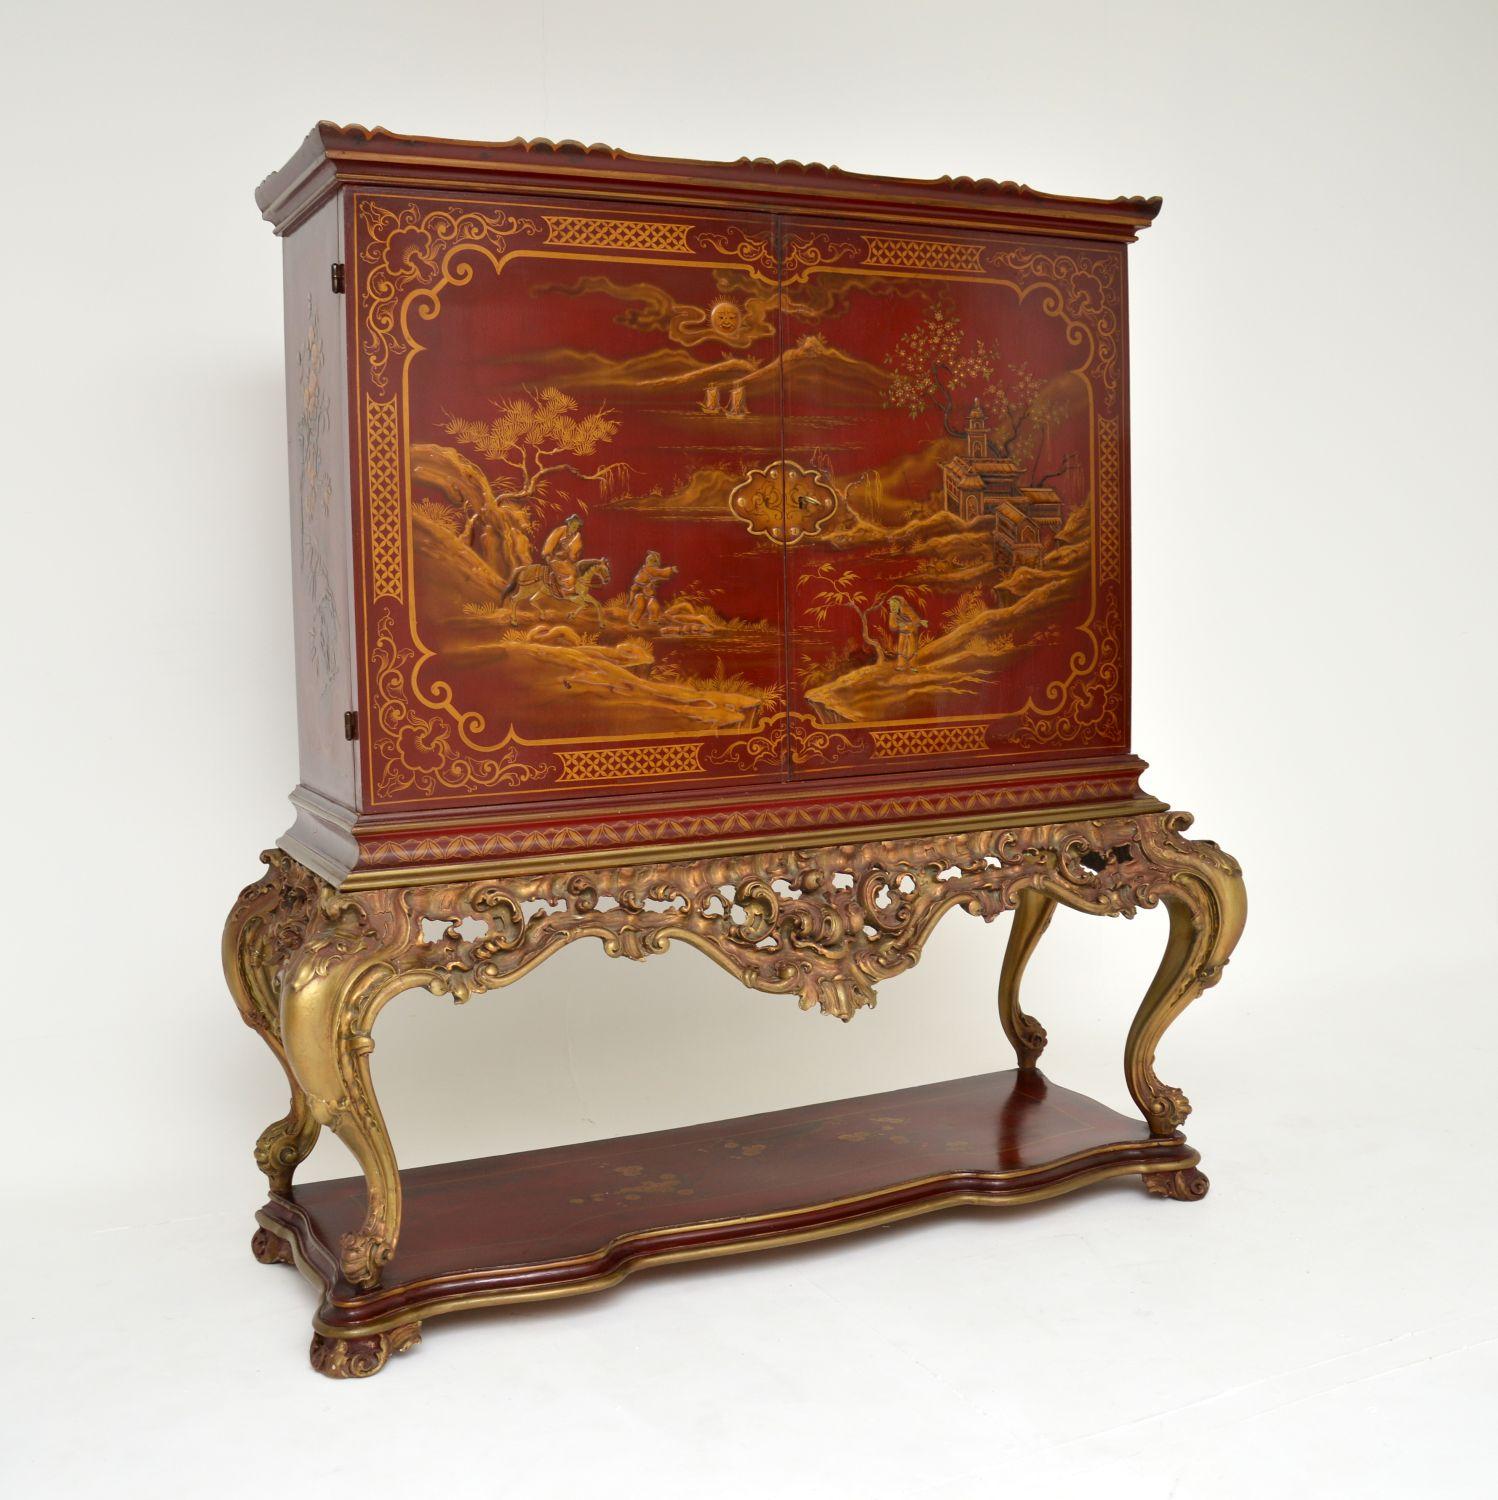 A magnificent antique Louis XV style lacquered chinoiserie cocktail drinks cabinet. This was made in England, it dates from around the 1930’s.

This is a most impressive piece of extremely high quality. It sits on an exquisitely carved base with a